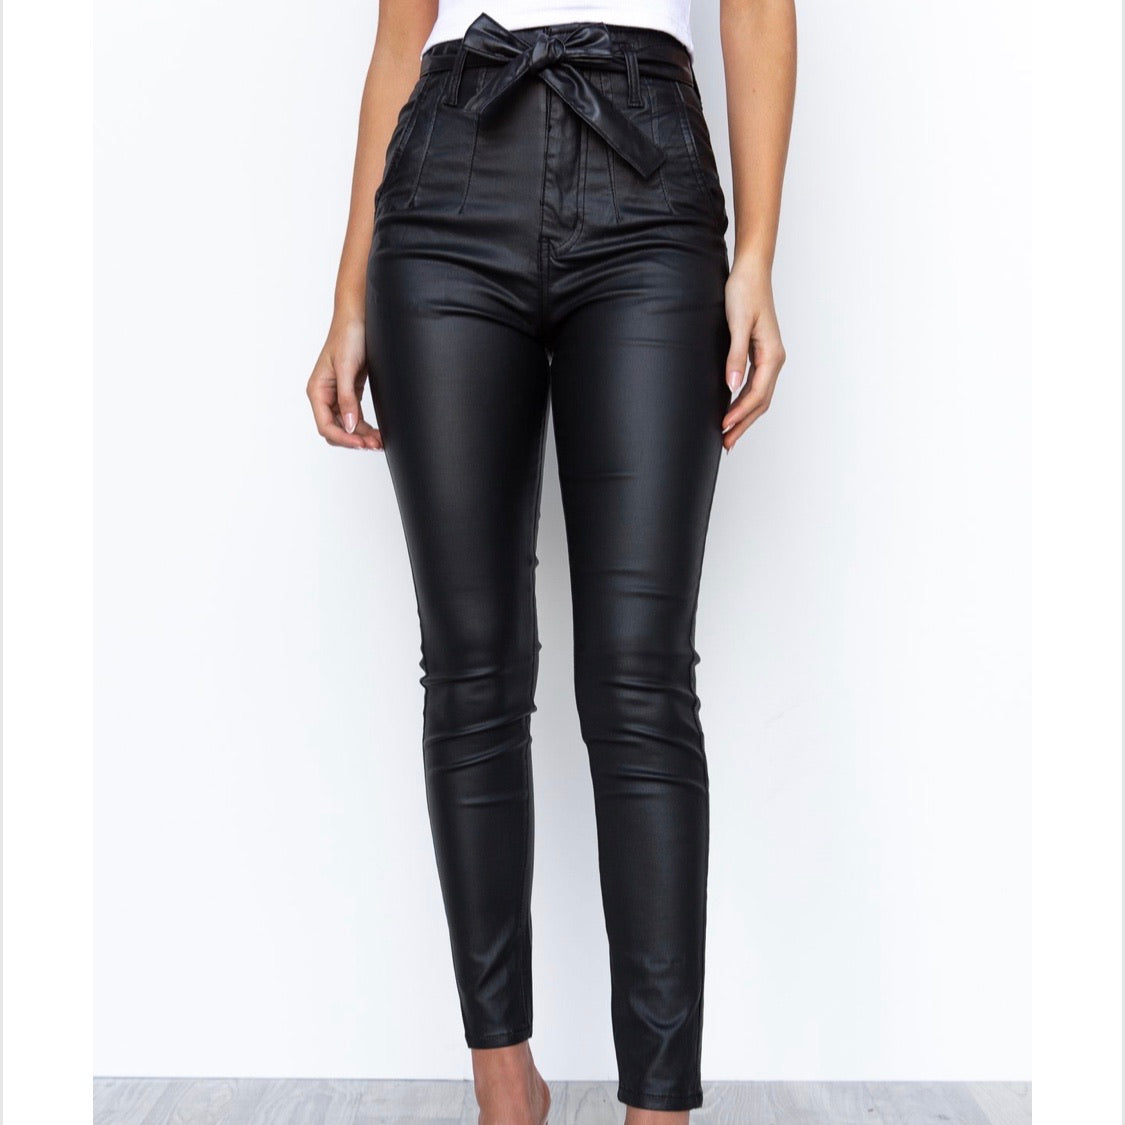 Womens Black Leather Look Jeans High Waisted –